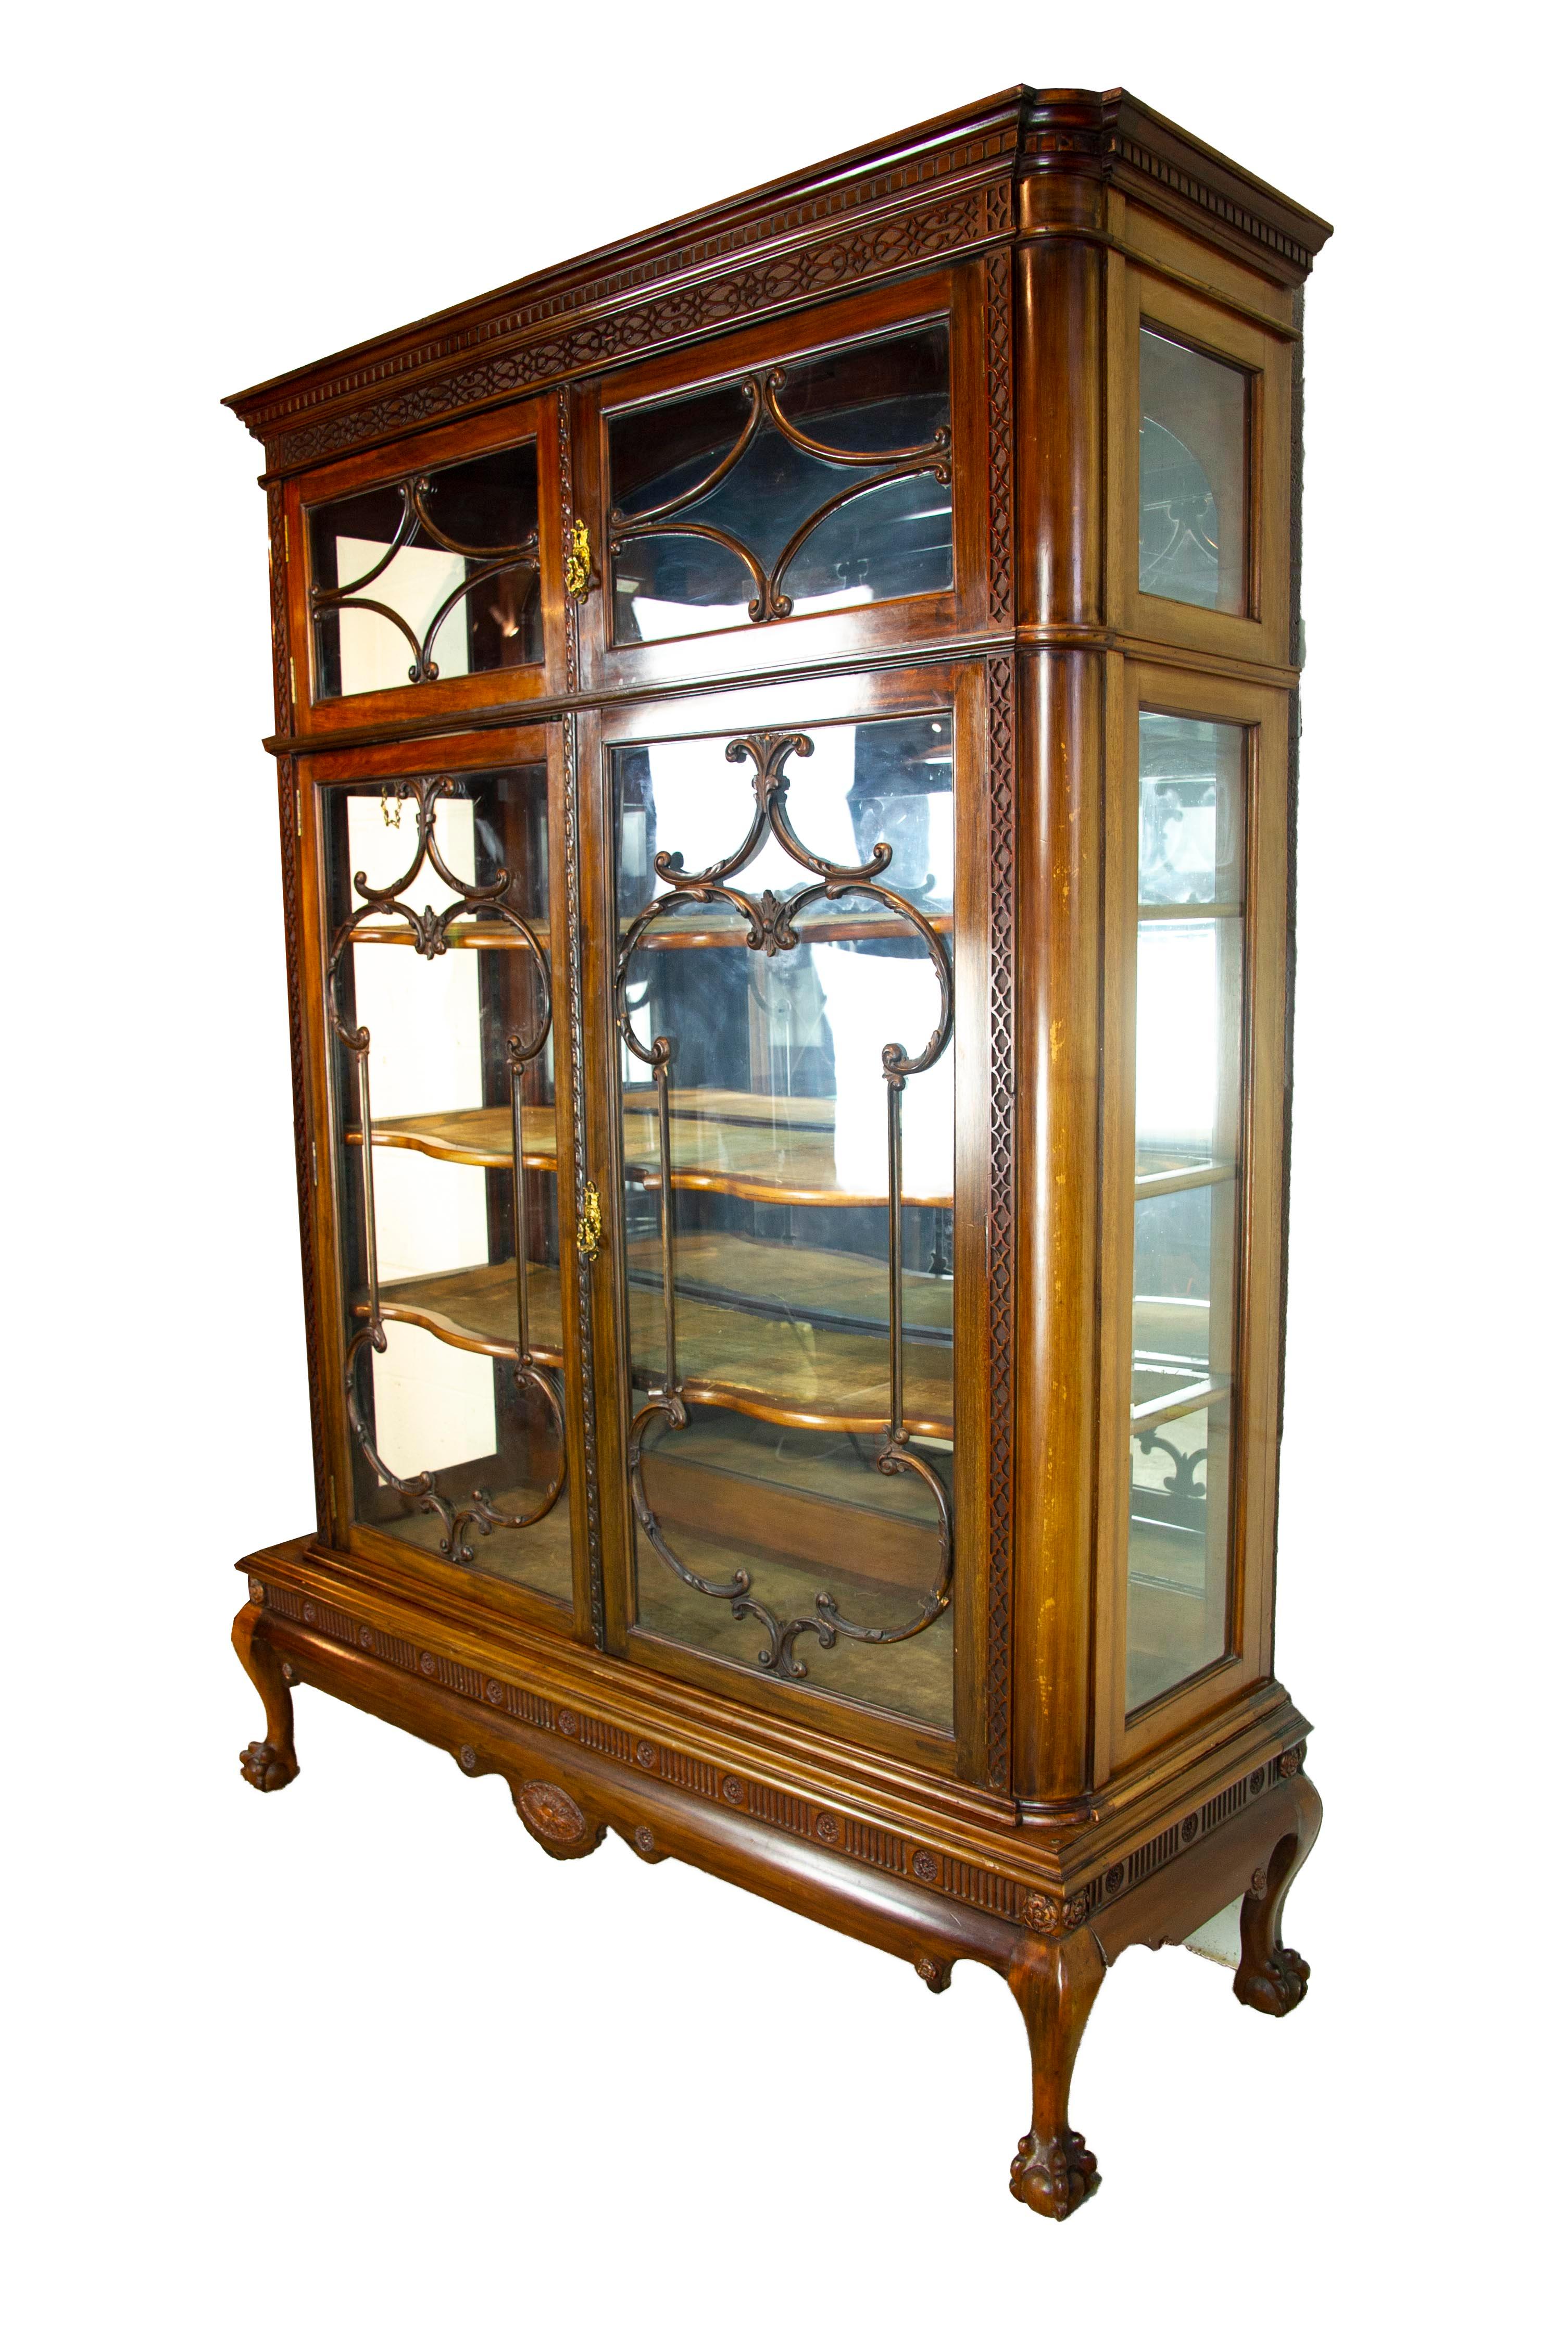 Antique display cabinet, walnut display, China cabinet, Antiques Furniture, Scotland 1920, H042

Scotland, 1920
Solid walnut with original finish
Dentil cornice
Fretwork frieze above
Pair of short glass doors with fretwork and original brass